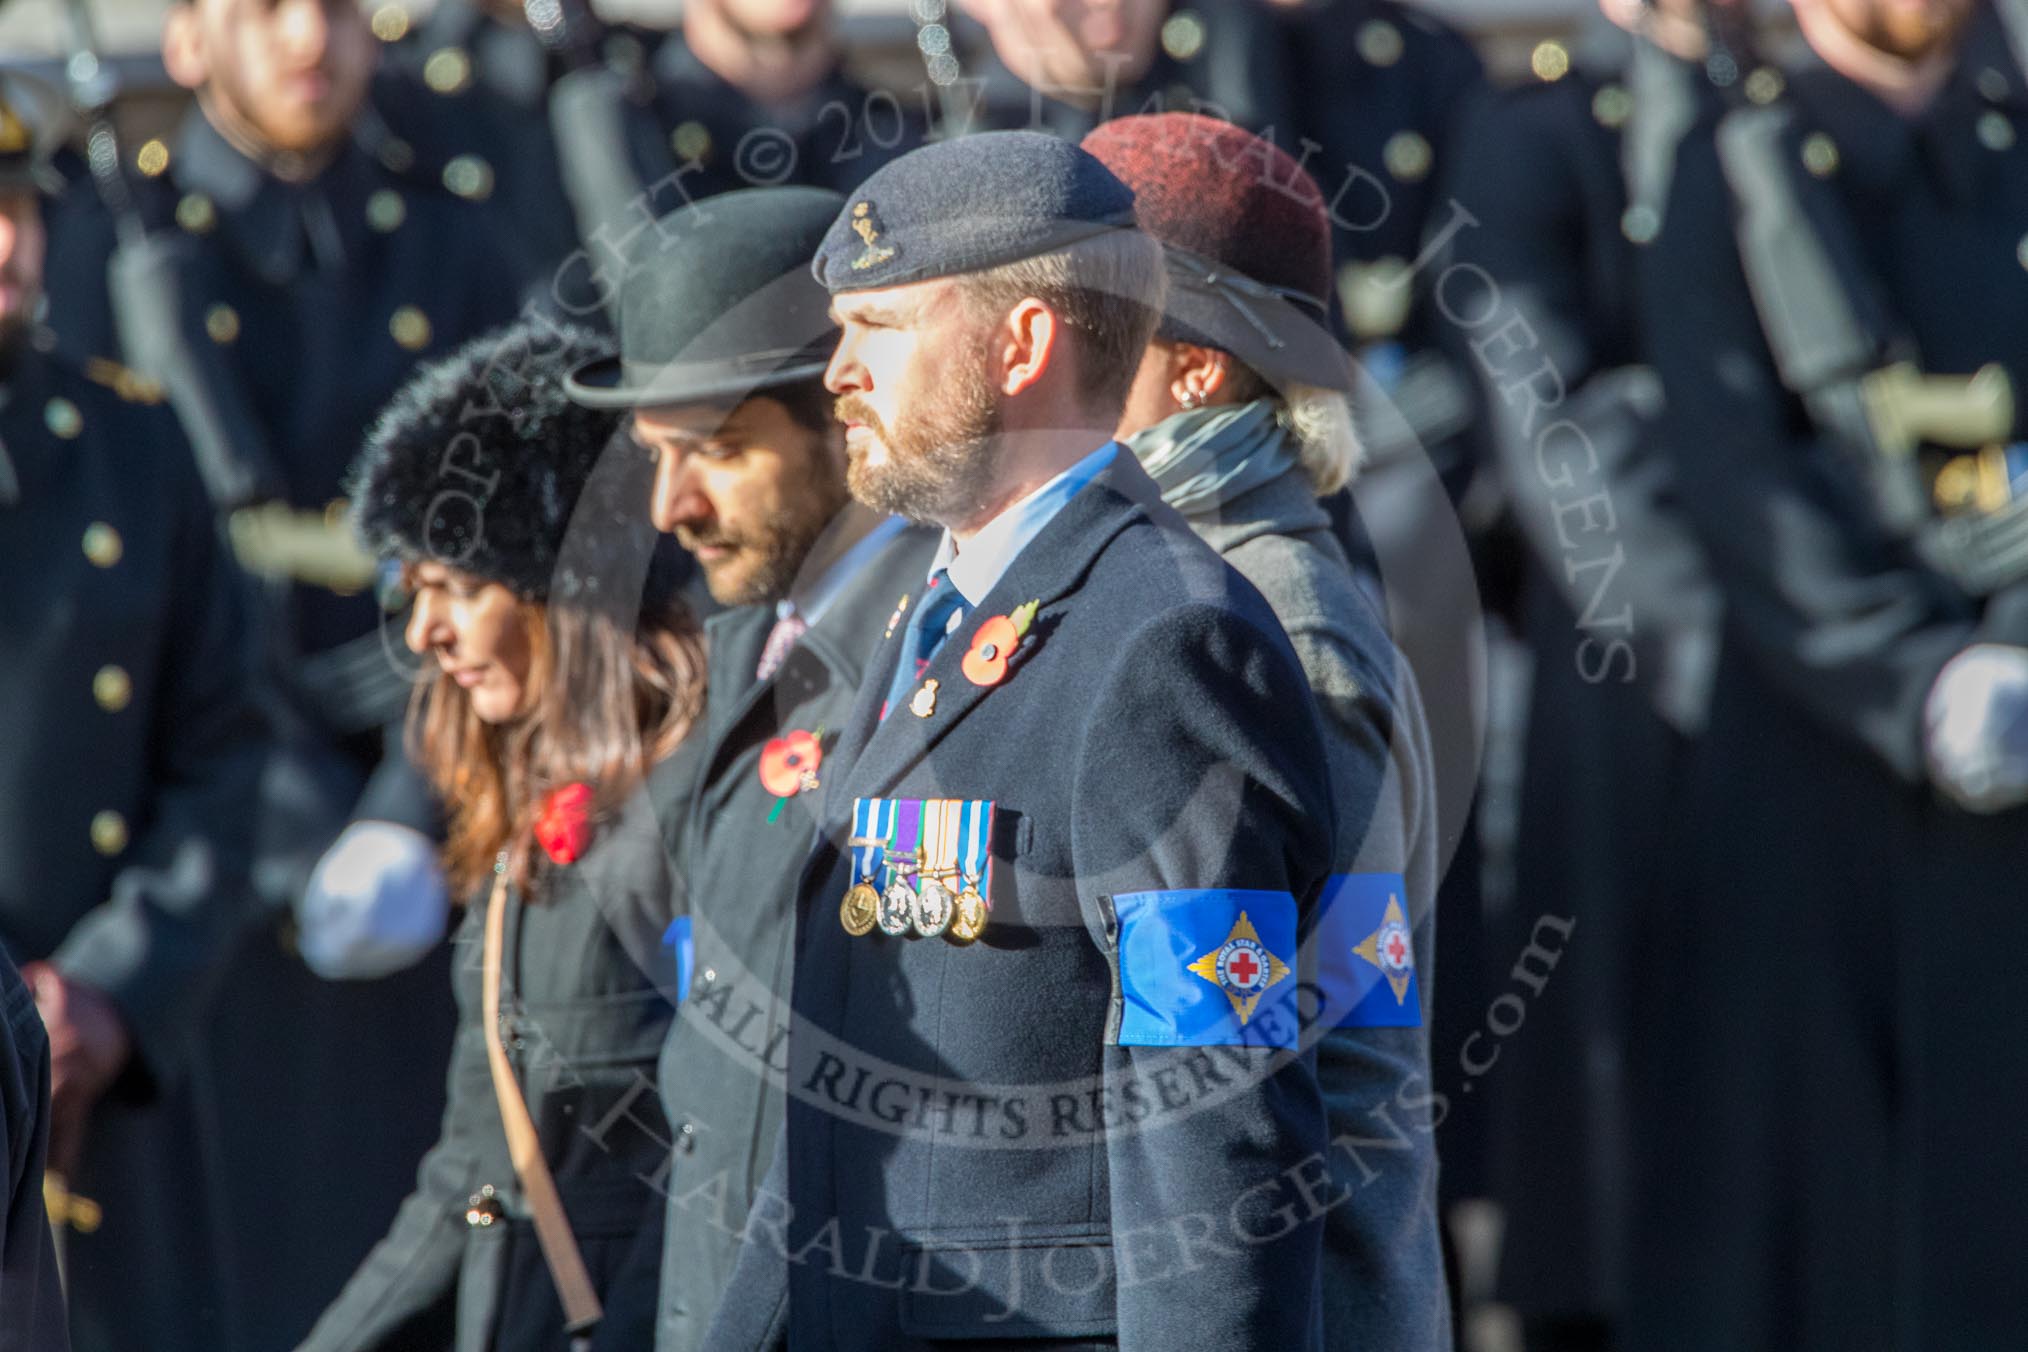 The Royal Star and Garter (Group AA5, 20 members) during the Royal British Legion March Past on Remembrance Sunday at the Cenotaph, Whitehall, Westminster, London, 11 November 2018, 11:49.